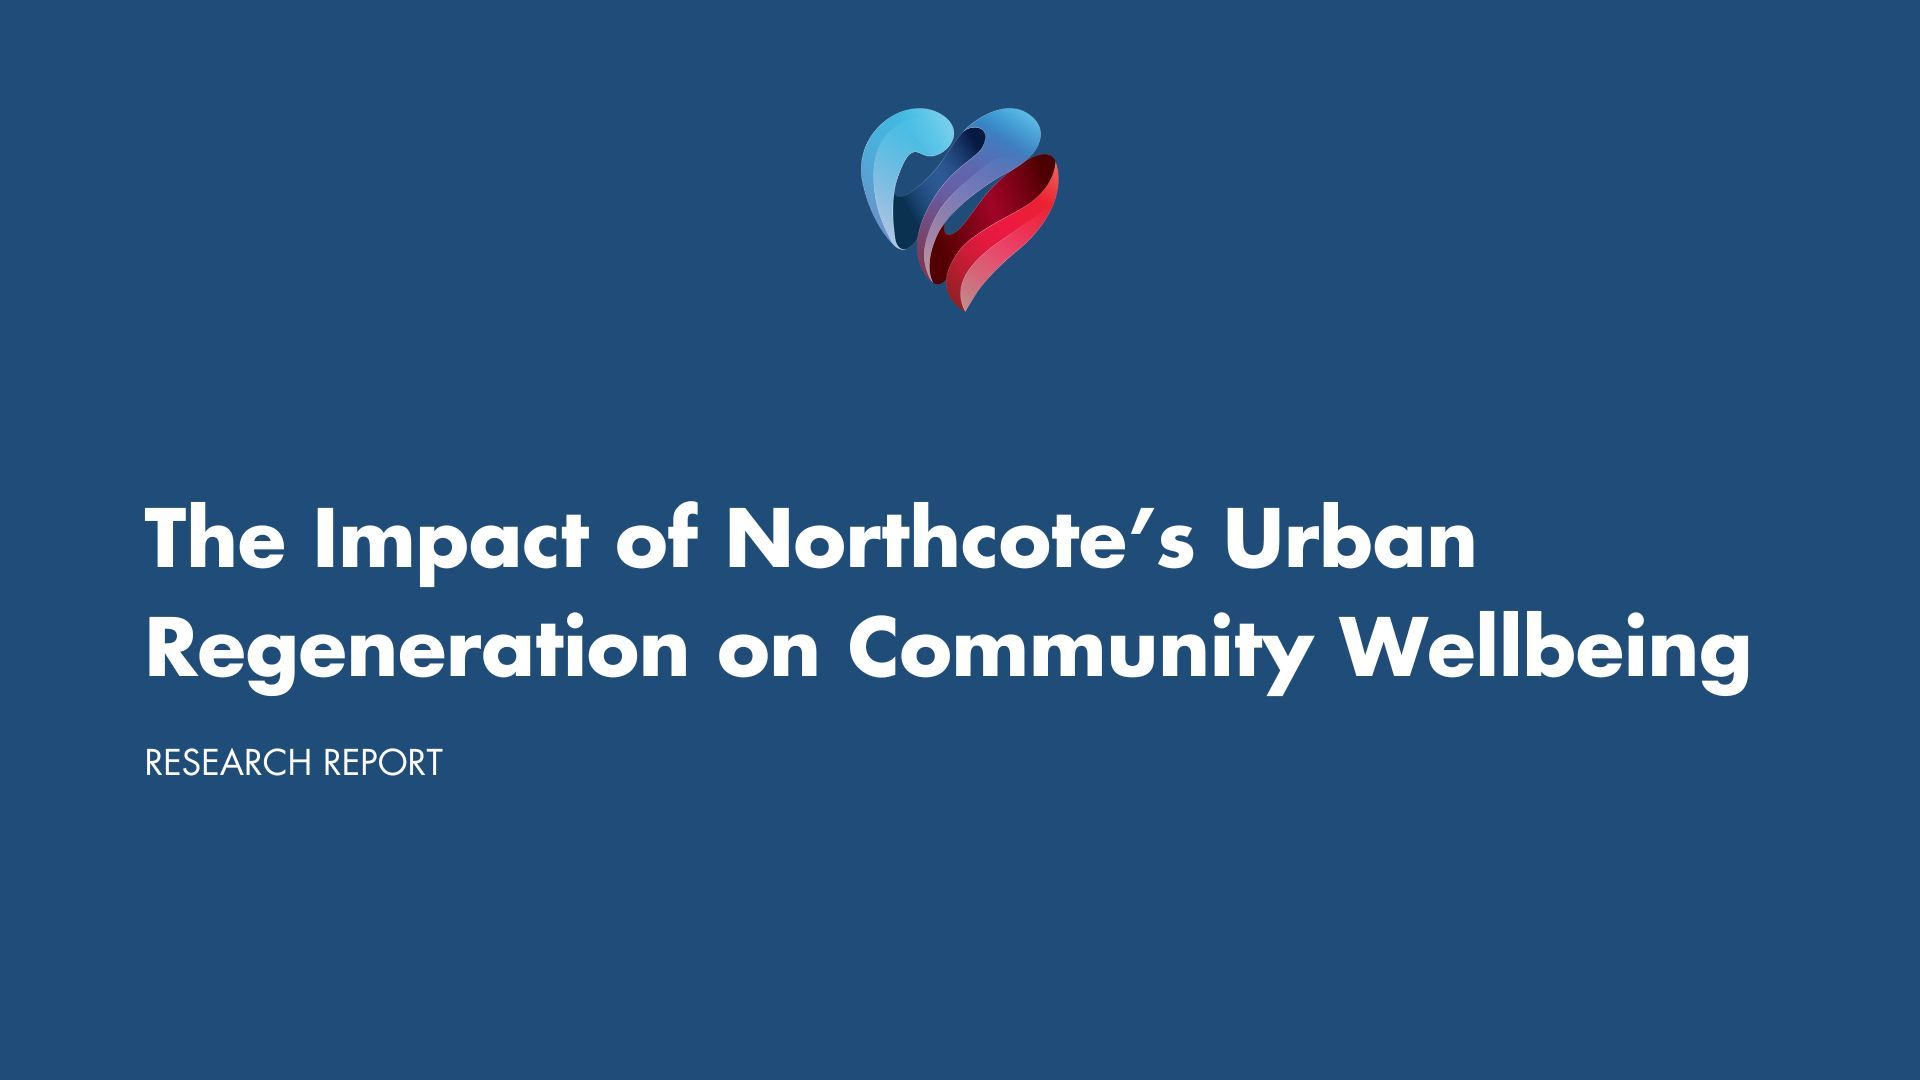 The Impact of Northcote's Urban Regeneration on Community Wellbeing